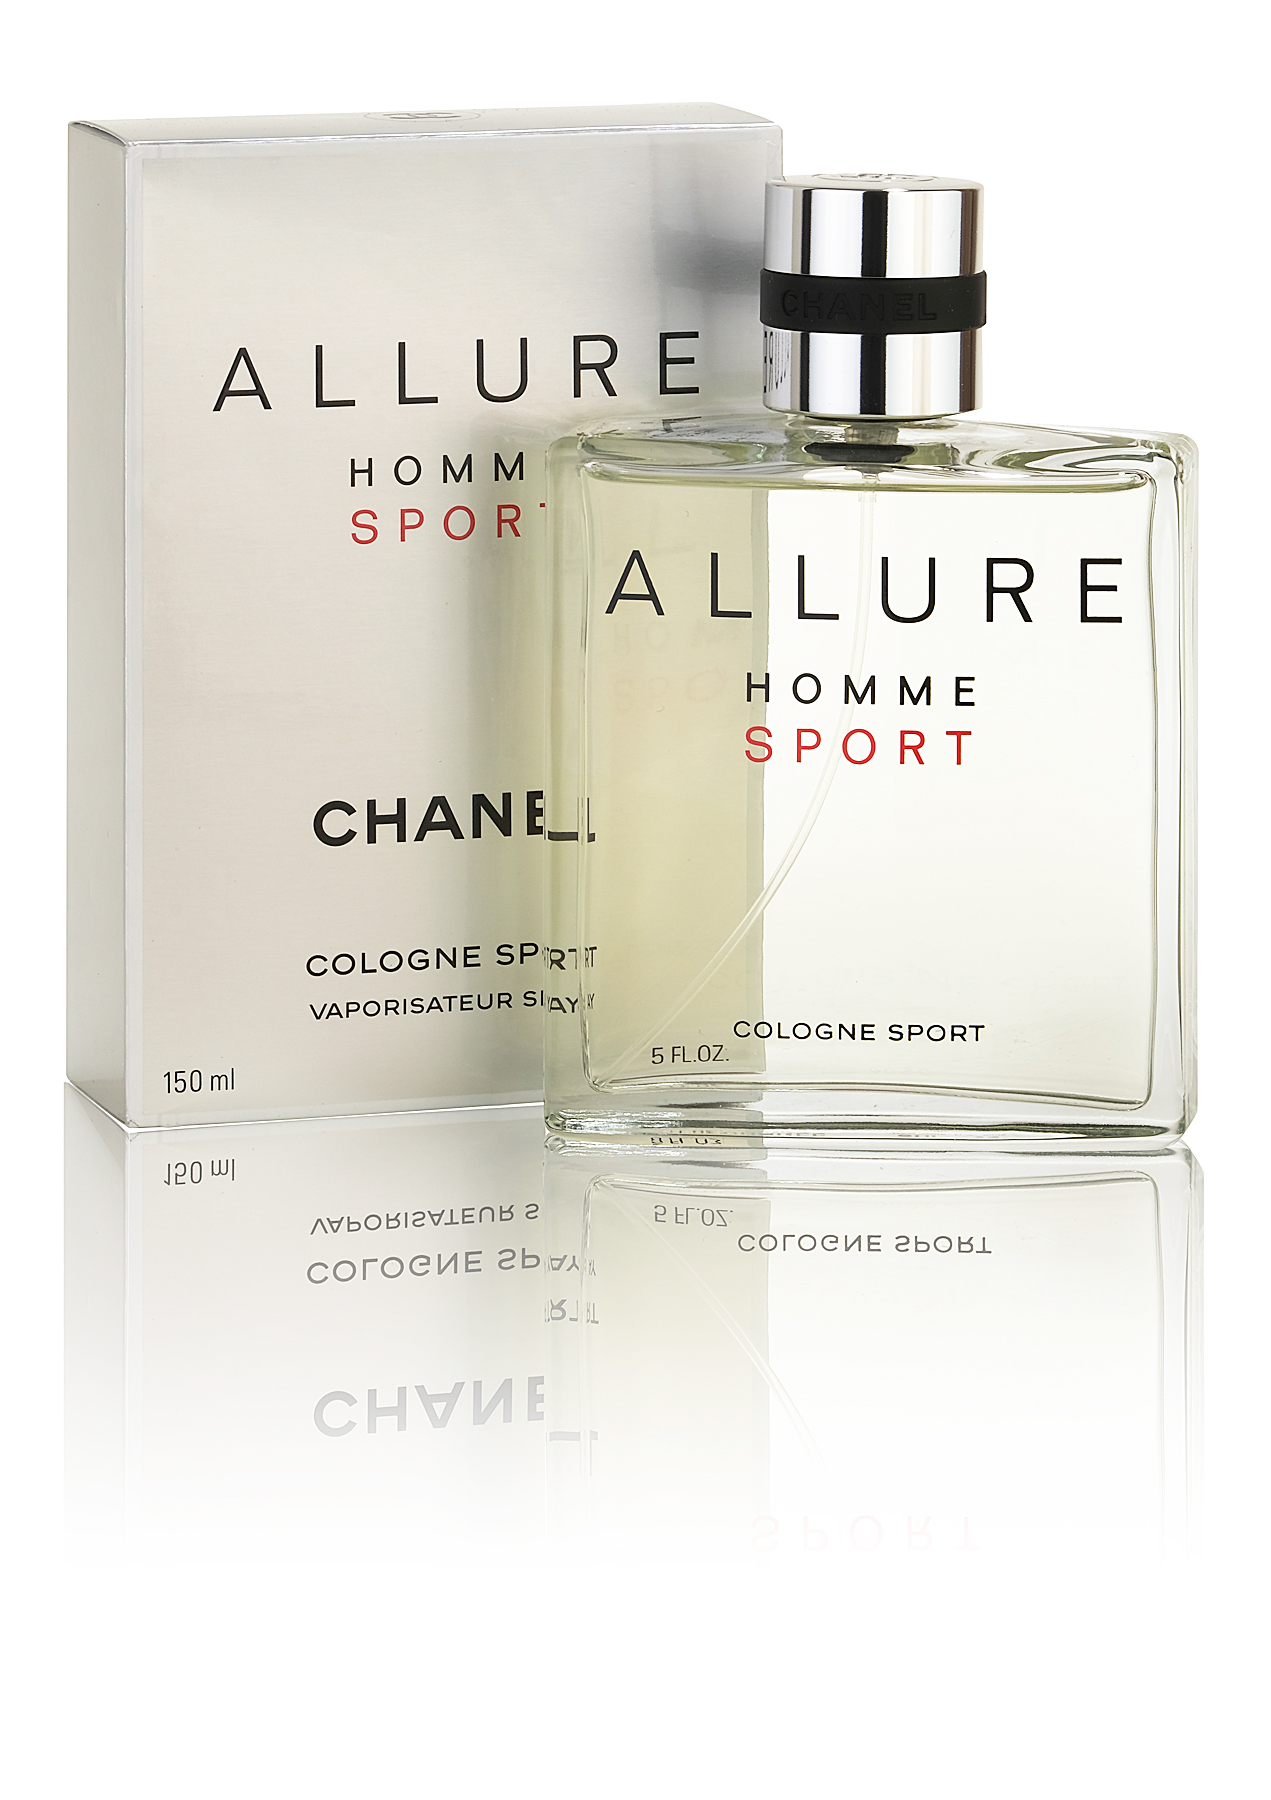 Homme sport cologne. Спорт Алюр Шанель Аллюр. Chanel Allure homme Sport Cologne 100 ml. Chanel Allure homme Sport. Chanel Allure Sport Cologne.